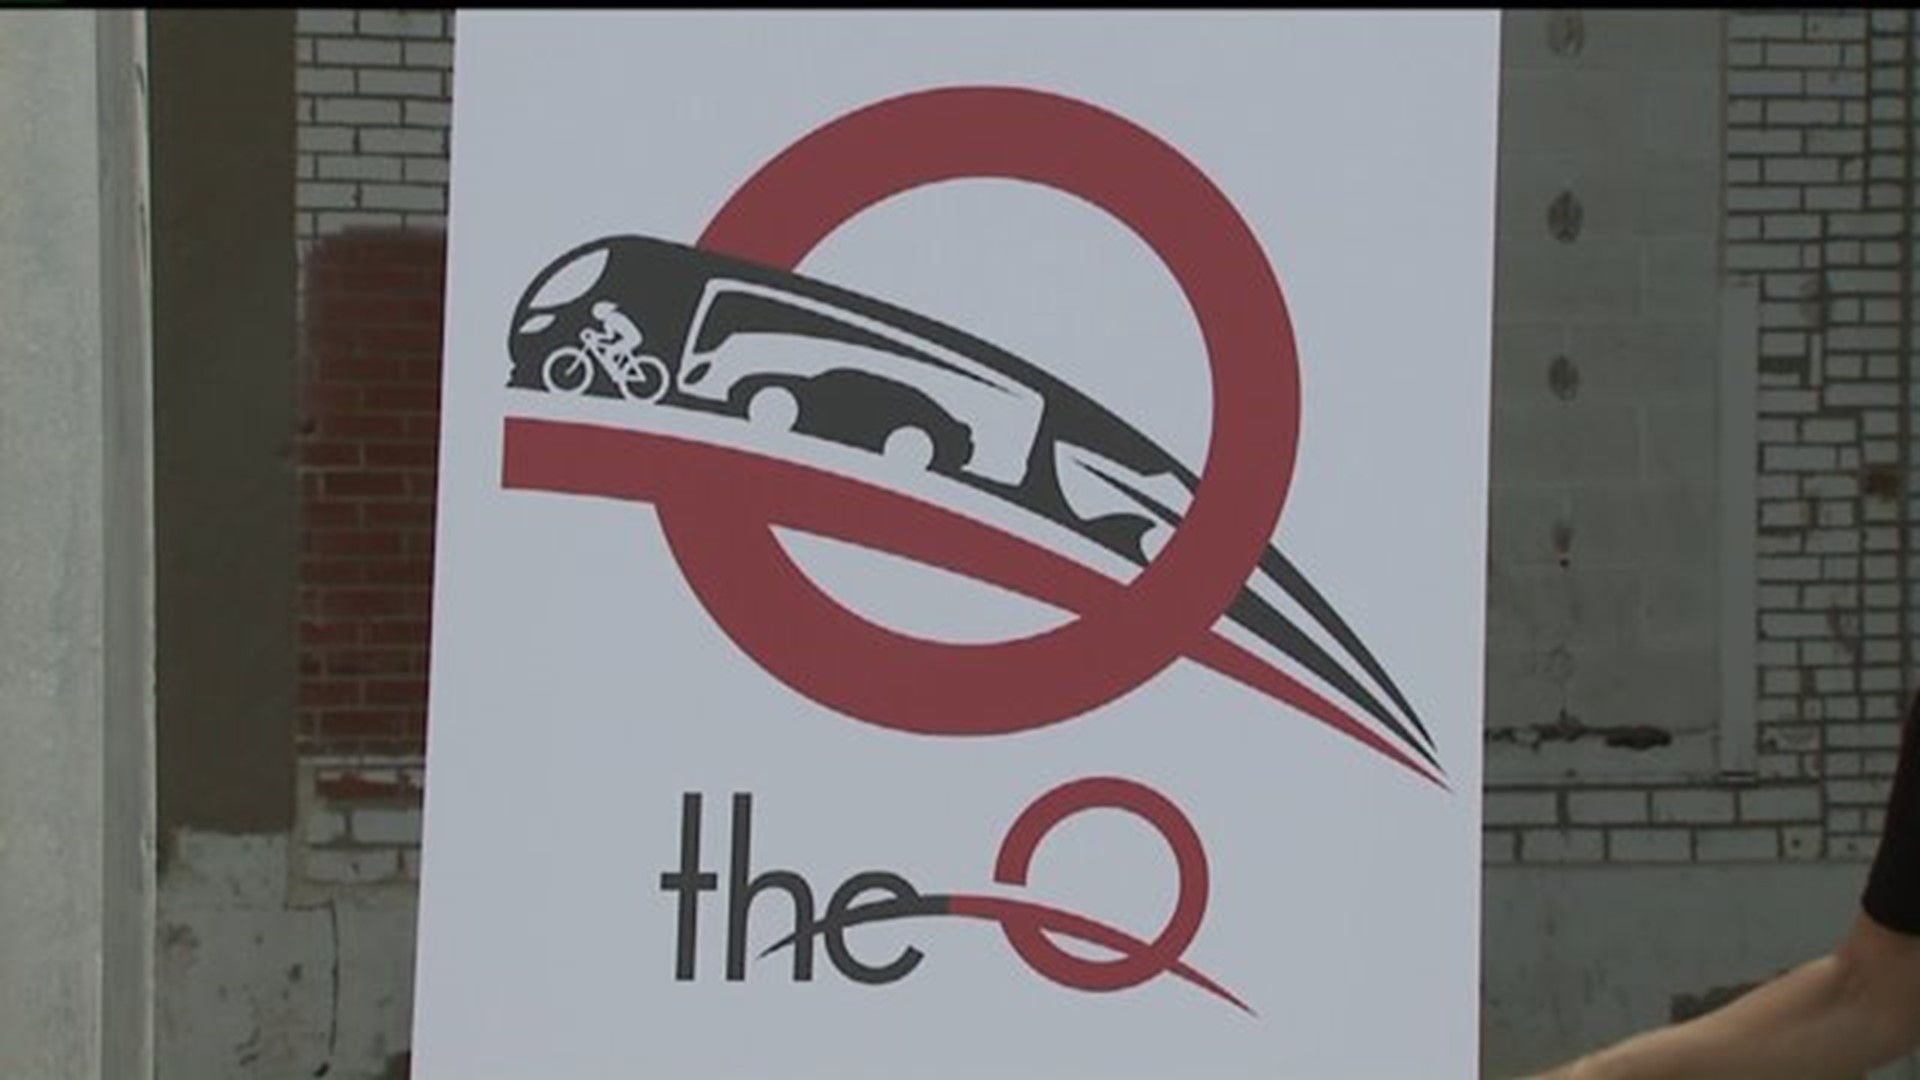 Construction to Start Soon on The "Q"